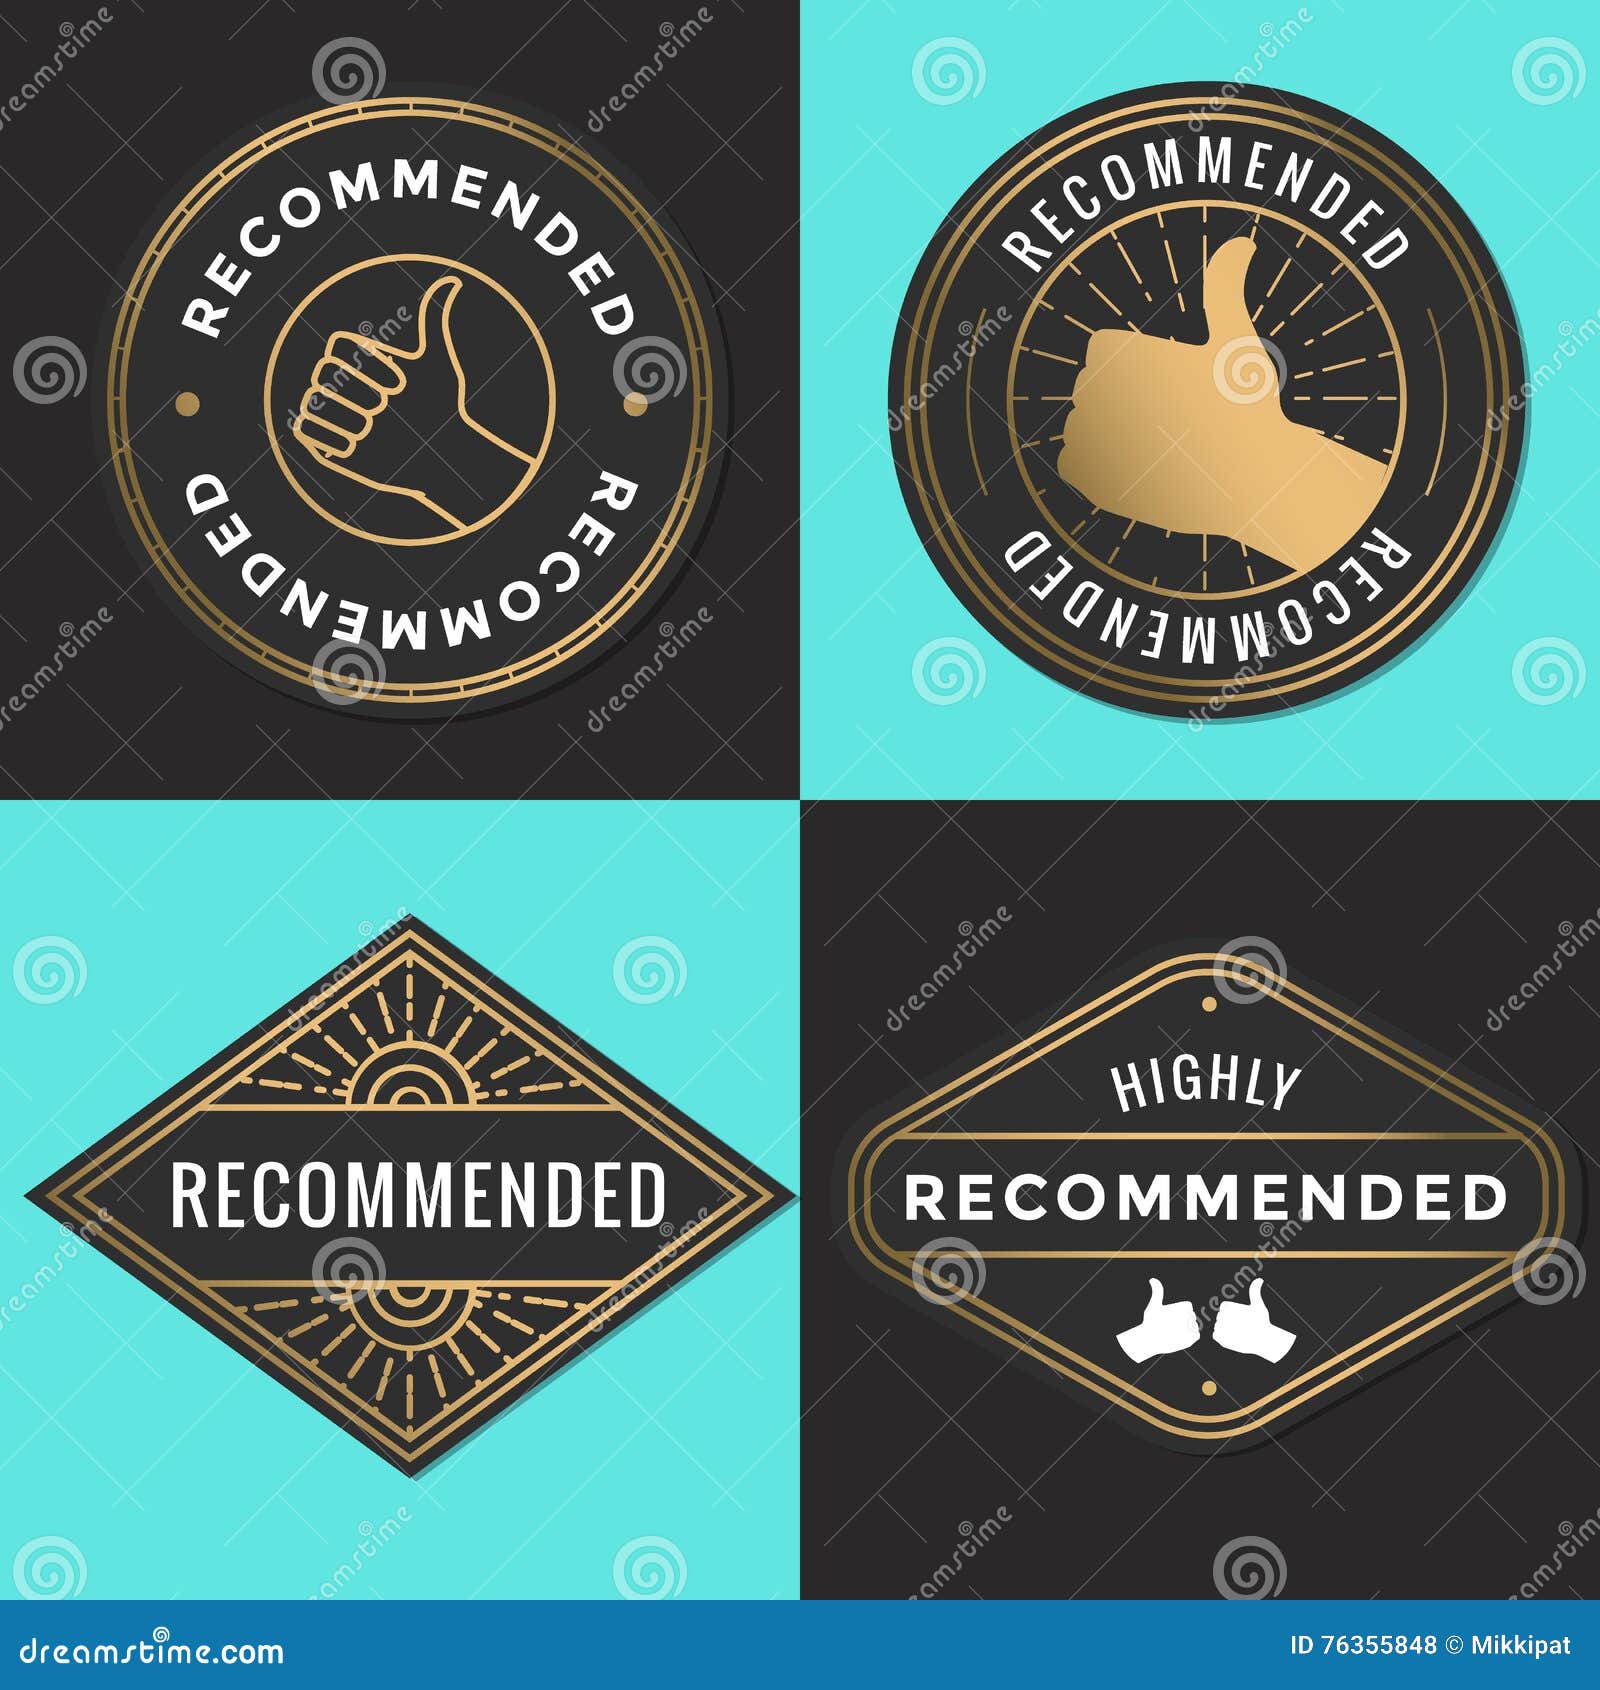 Set of Recommended Logo, Badges, Label, Tag in Golden Color. Stock